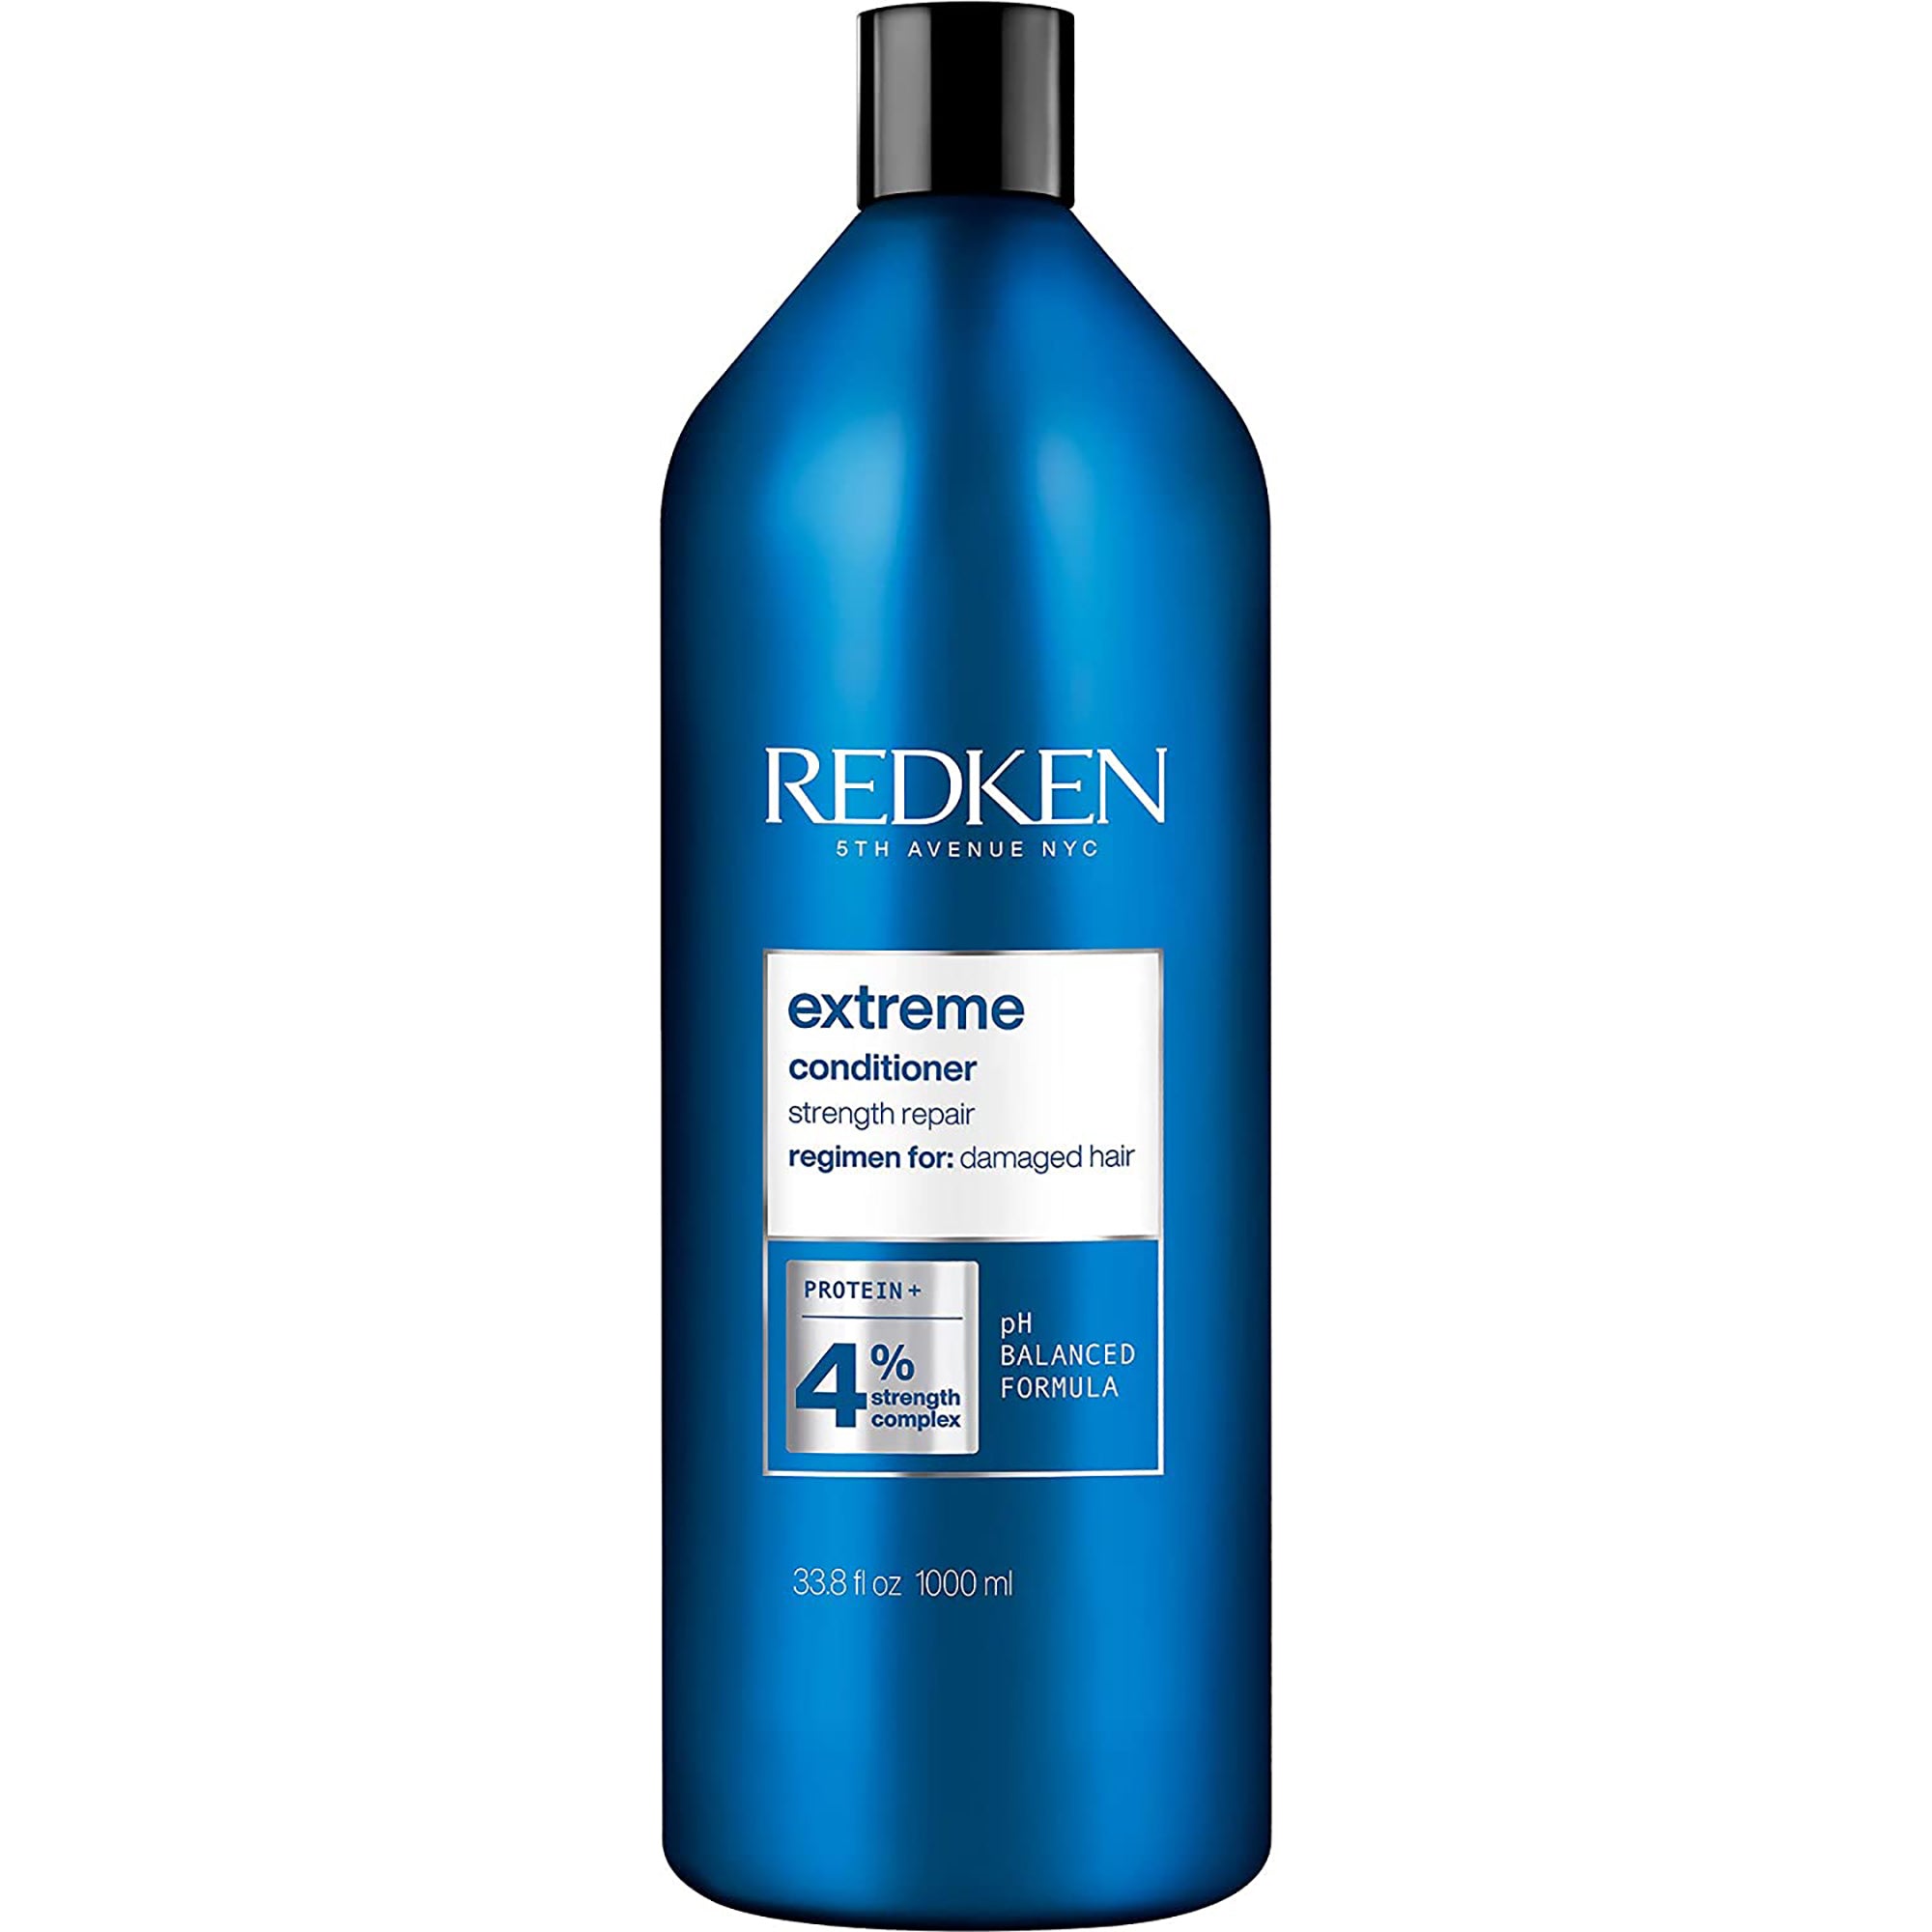 Redken Extreme Shampoo and Conditioner Liter Duo ($104 Value) / DUO